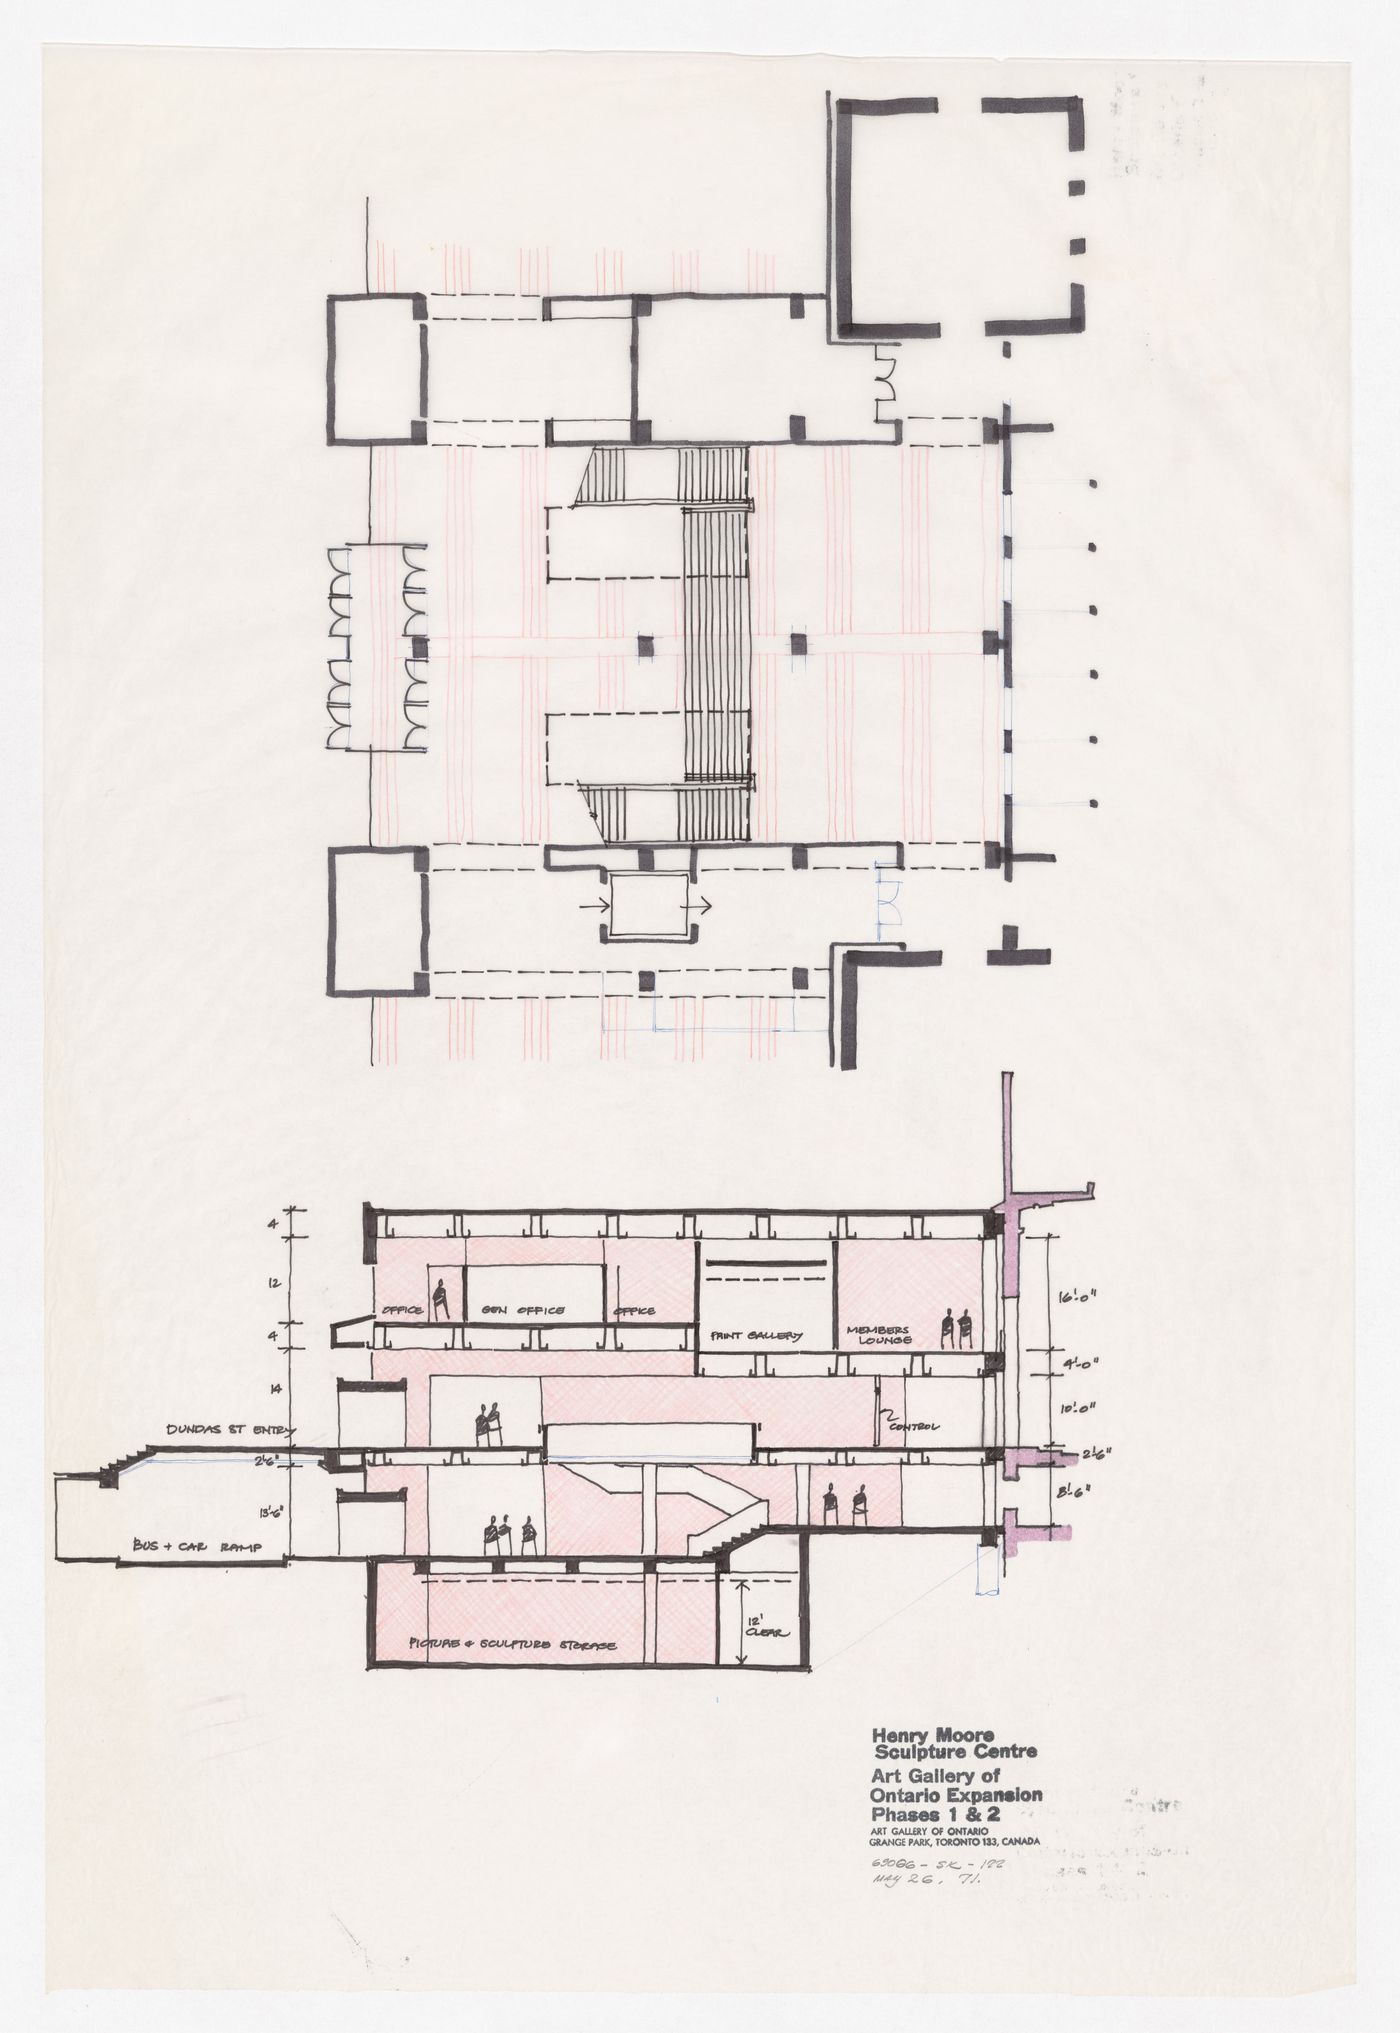 Sketch plan and section for Henry Moore Sculpture Centre, Art Gallery of Ontario, Stage I Expansion, Toronto